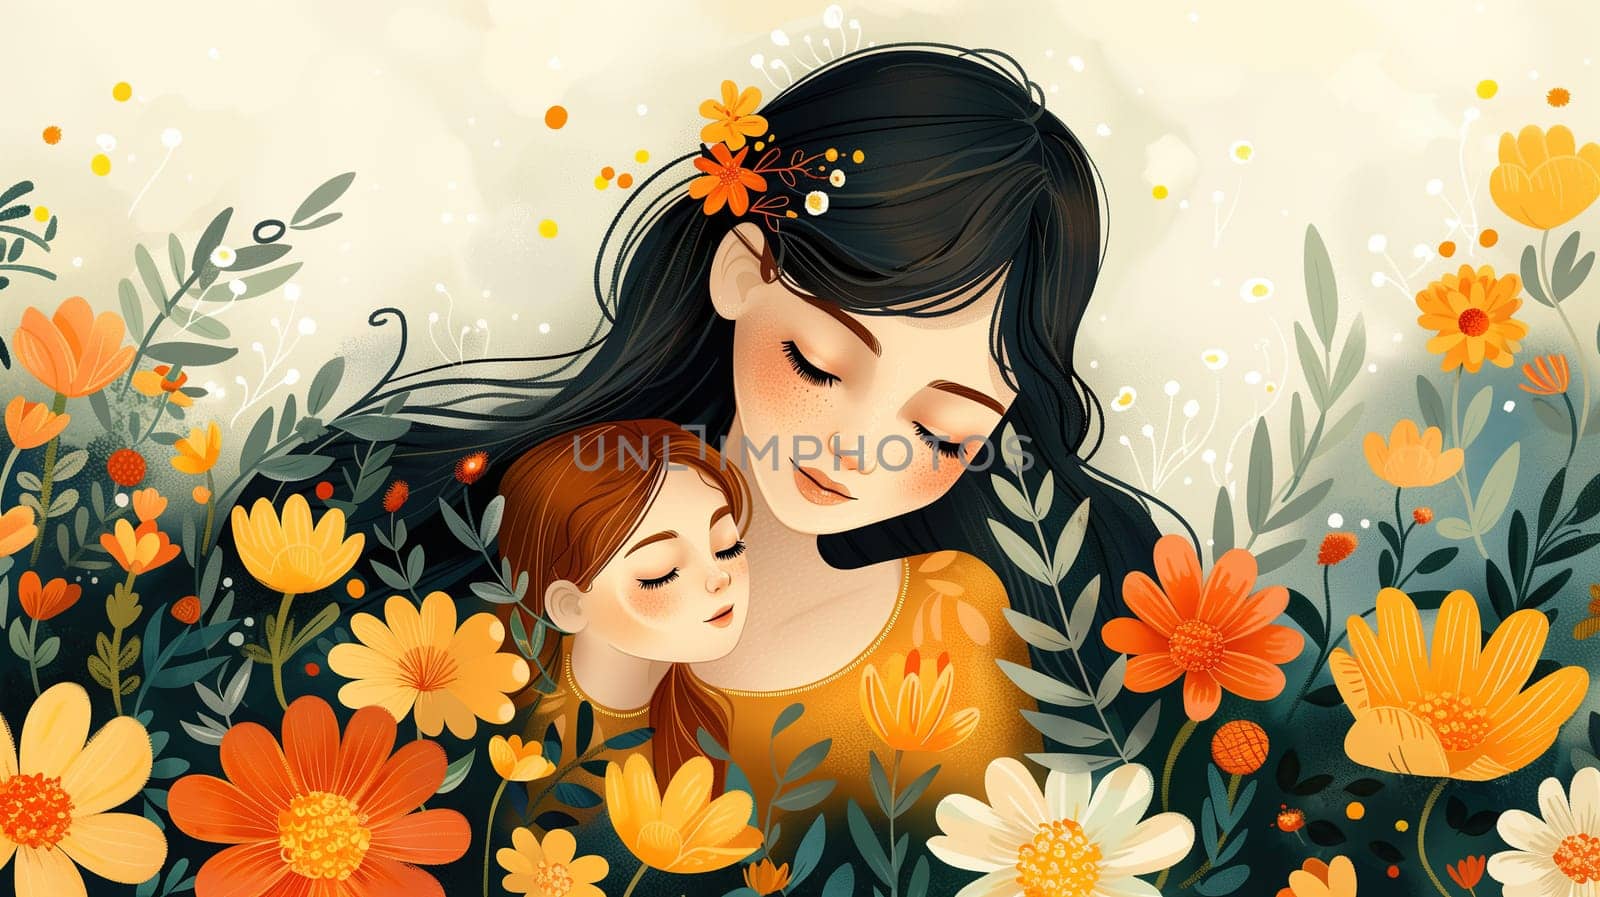 Mother Holding Child in Field of Flowers by TRMK